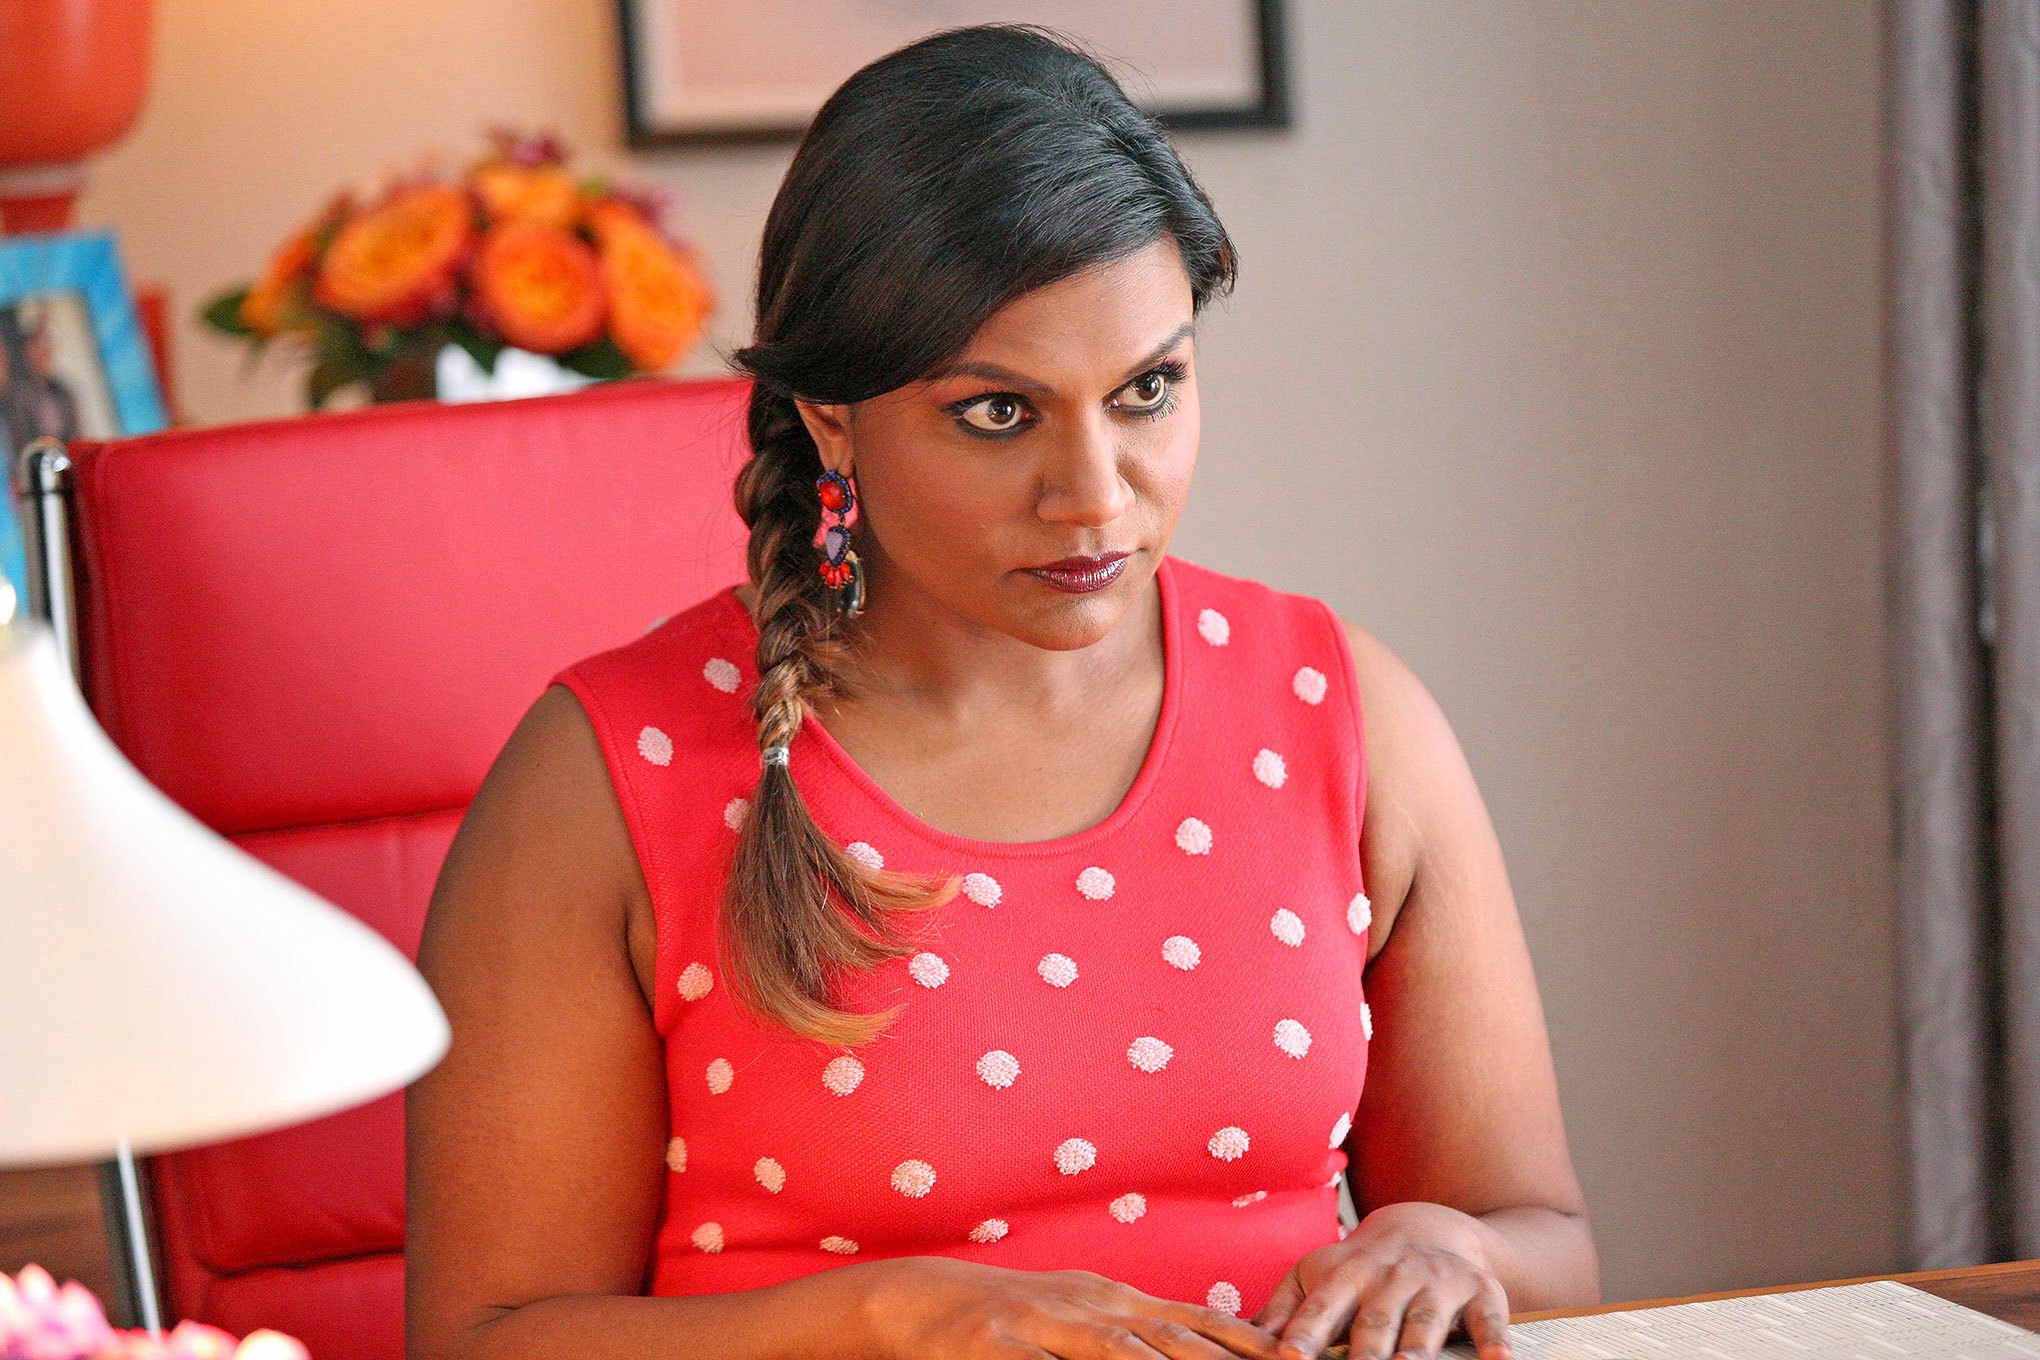 Mindy Kaling Wallpaper Image Photos Pictures Background